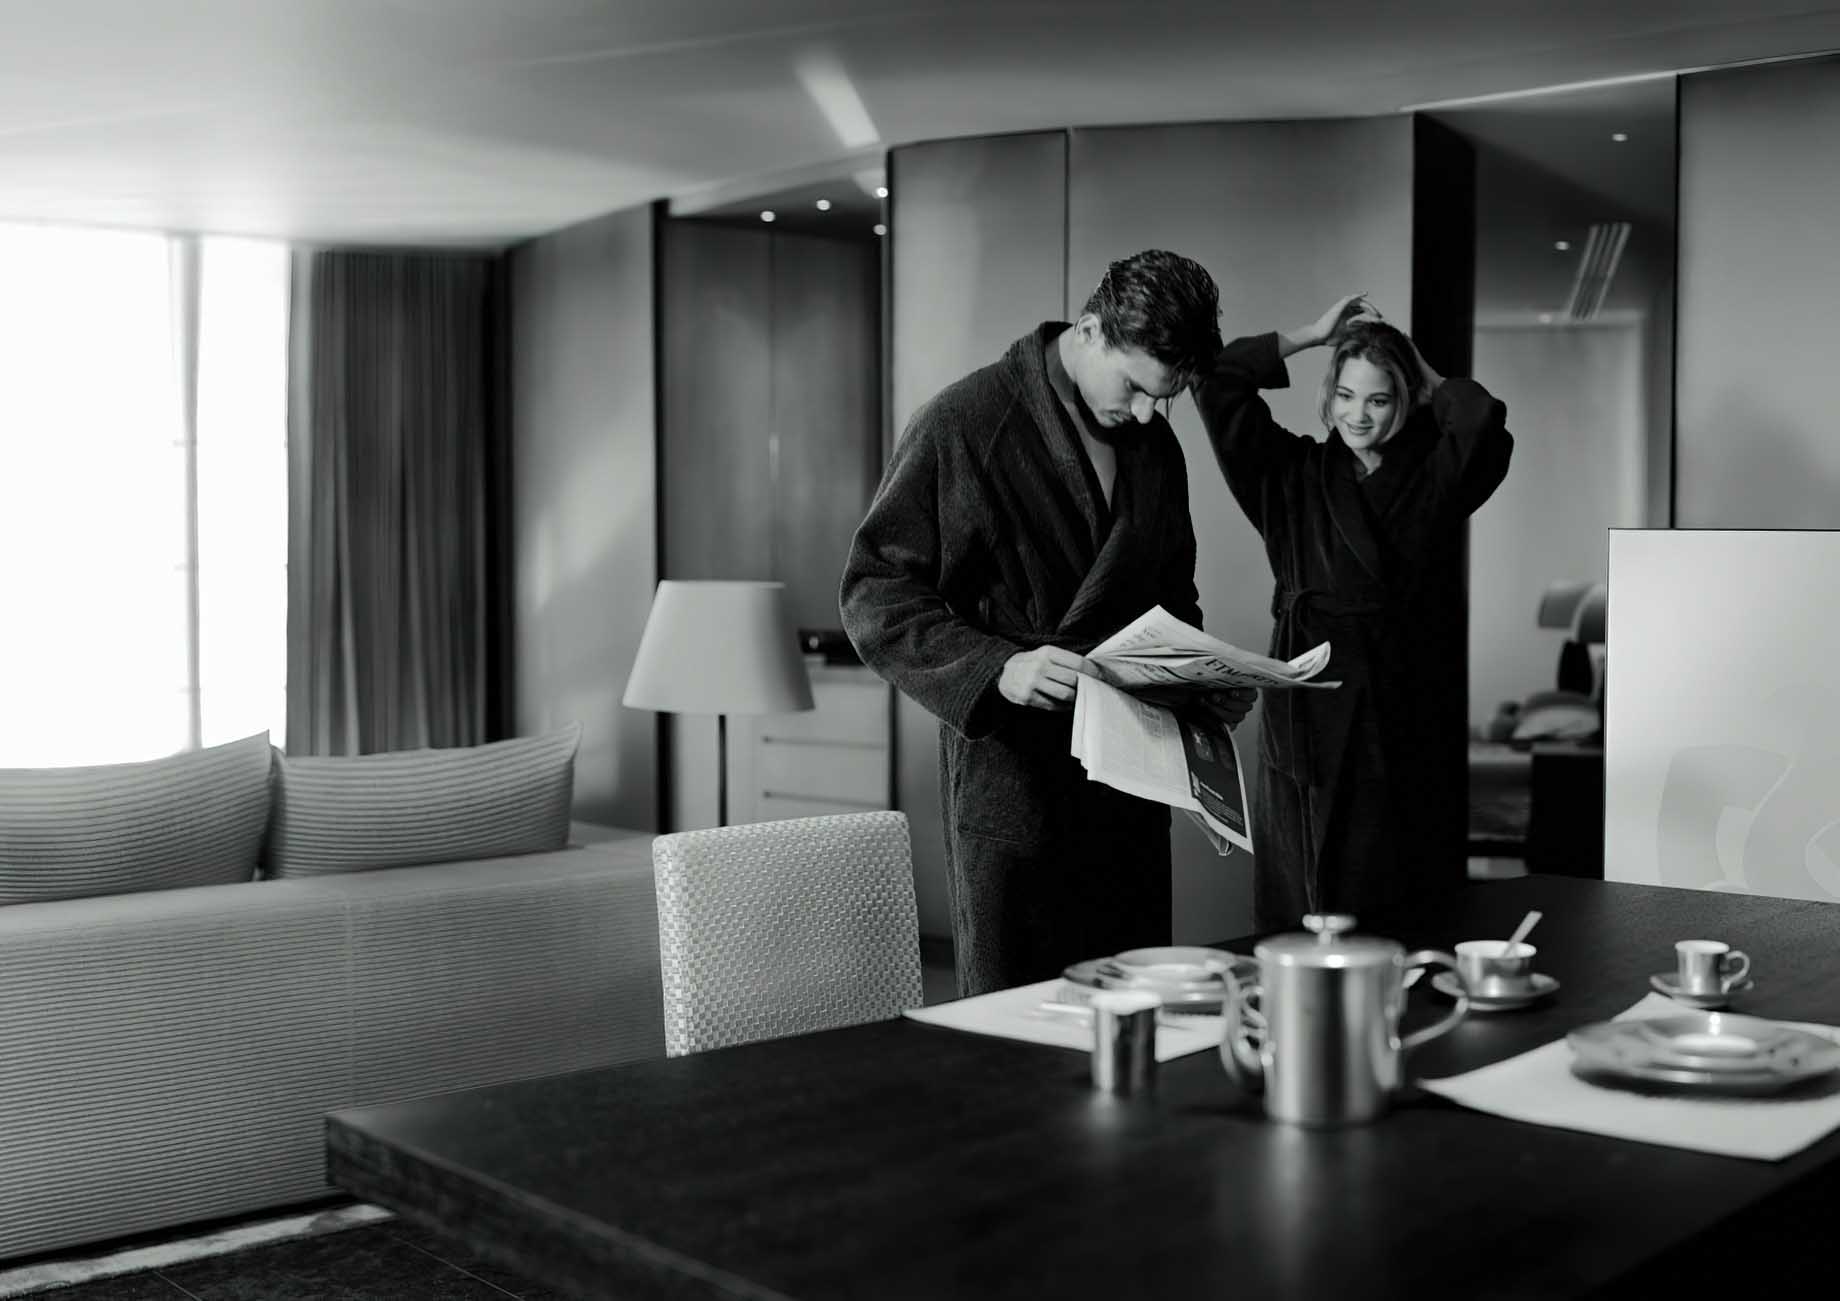 015 – Armani Hotel Milano – Milan, Italy – Couple Getting Ready for in Room Breakfast